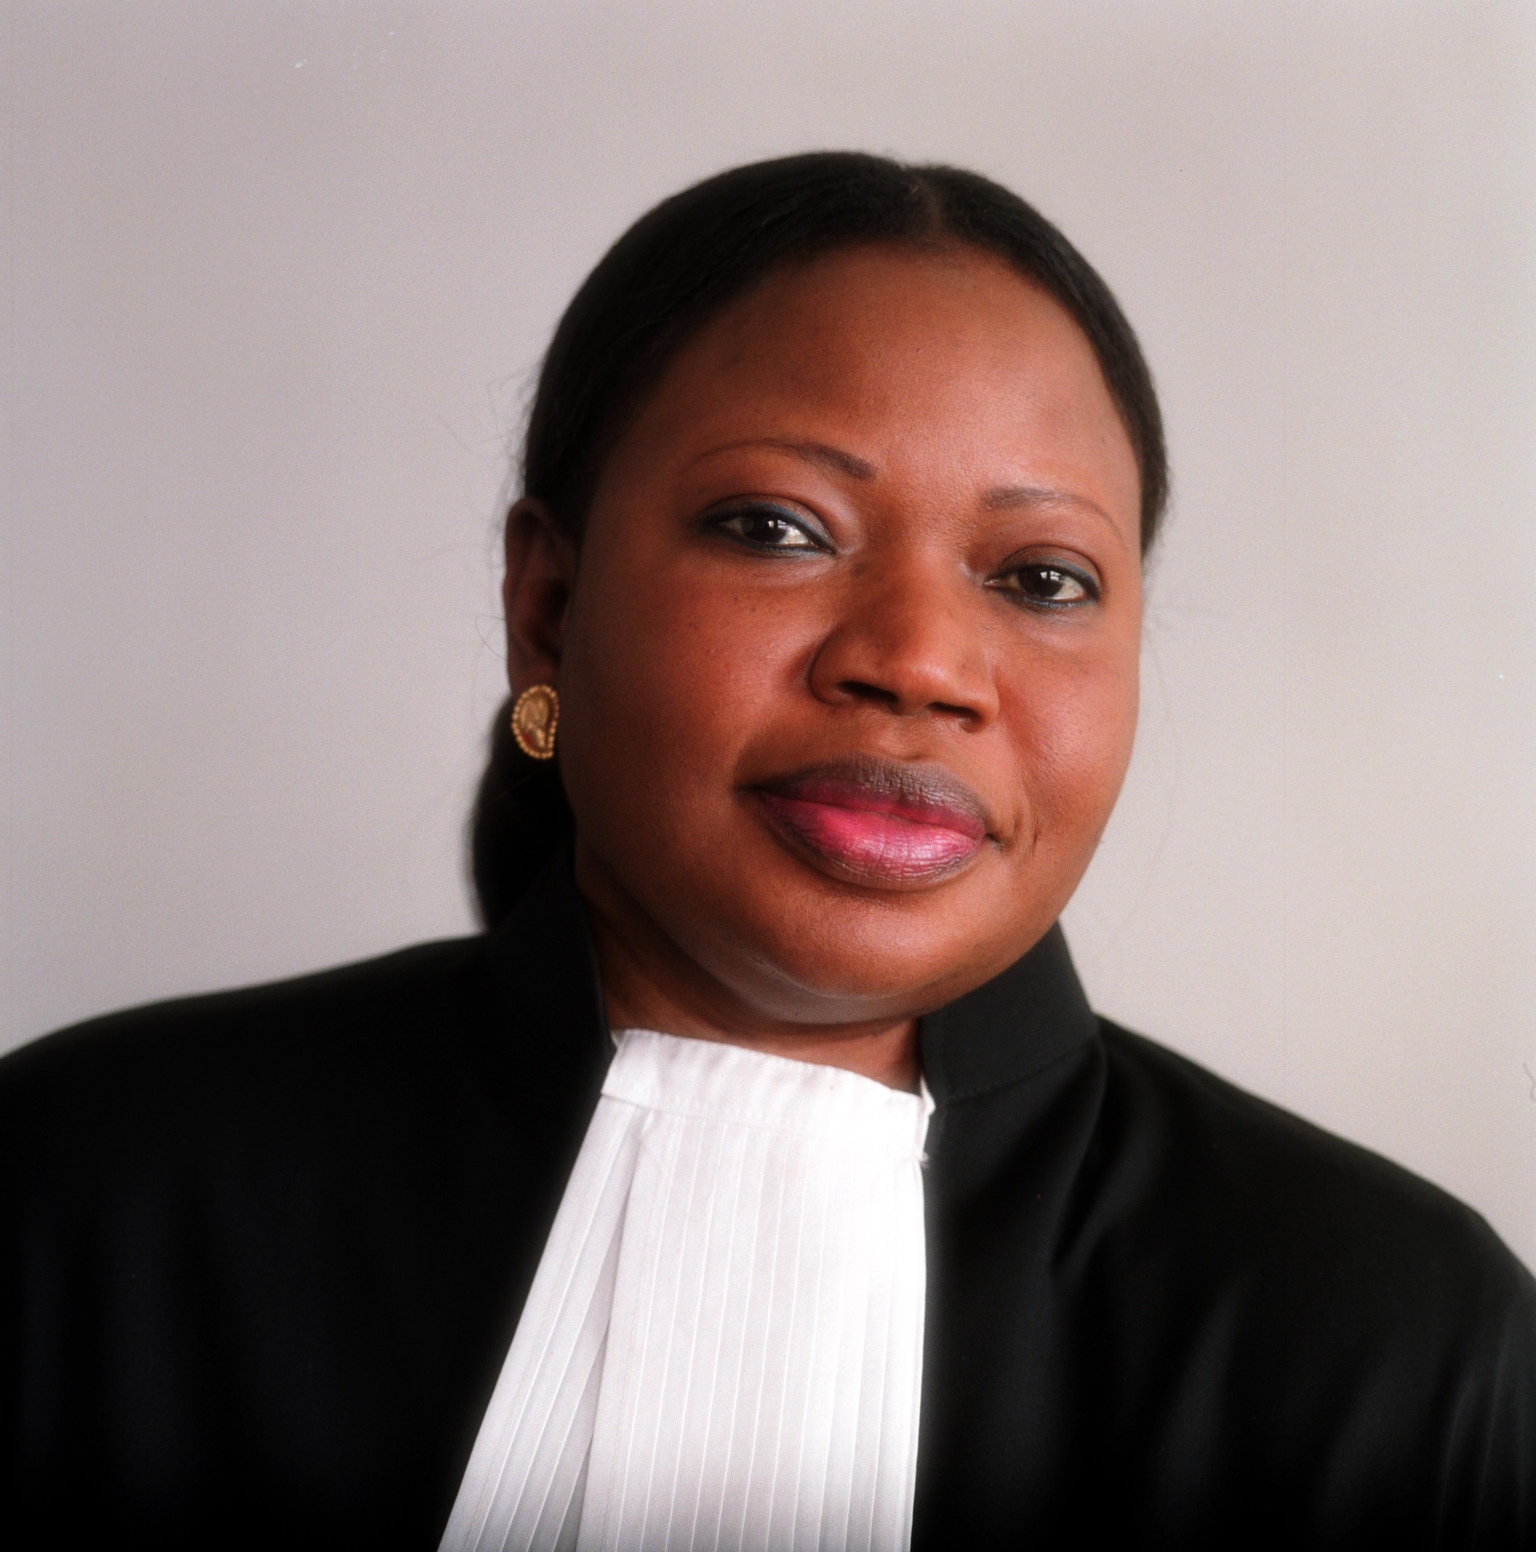 ICC Prosecutor’s withdrawal of charges against Kenyatta, a blow to victims of the post-election violence In Kenya